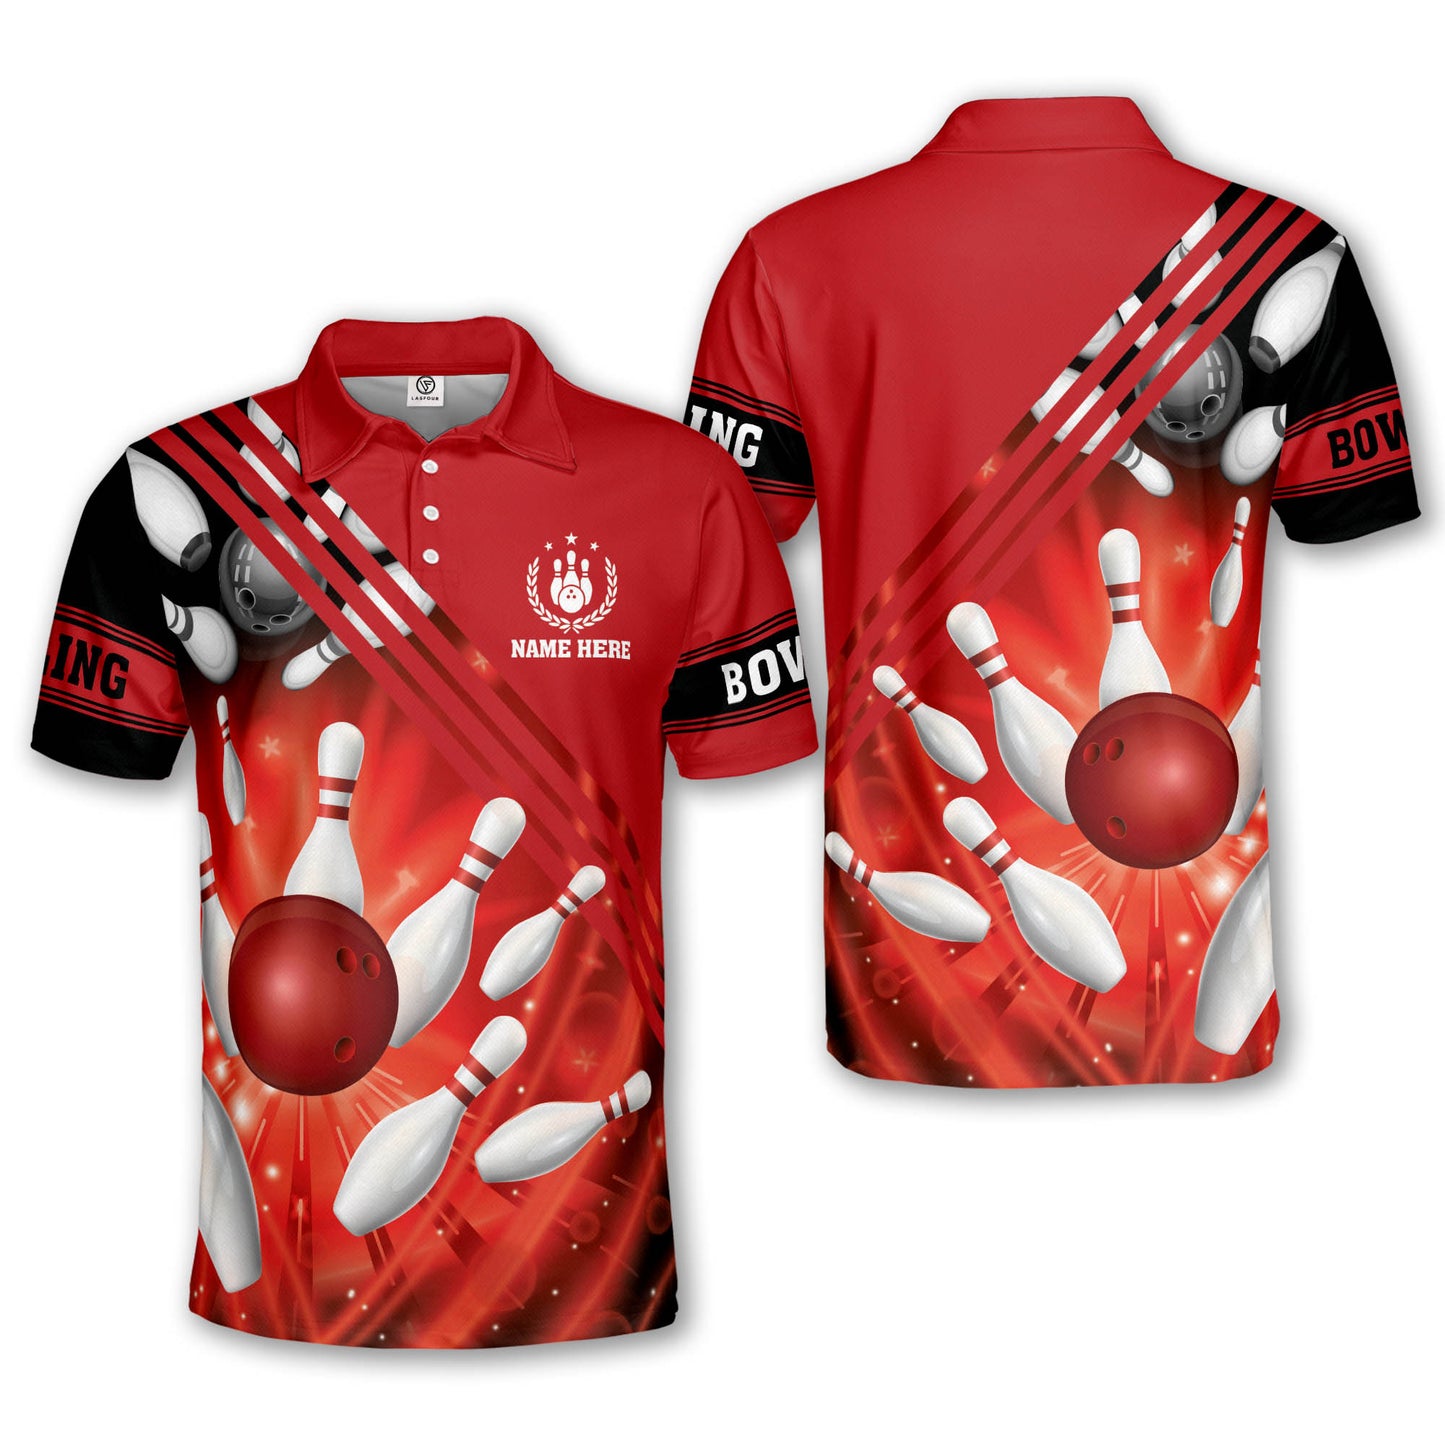 Funny Bowling Shirts For Men And Women BM0250